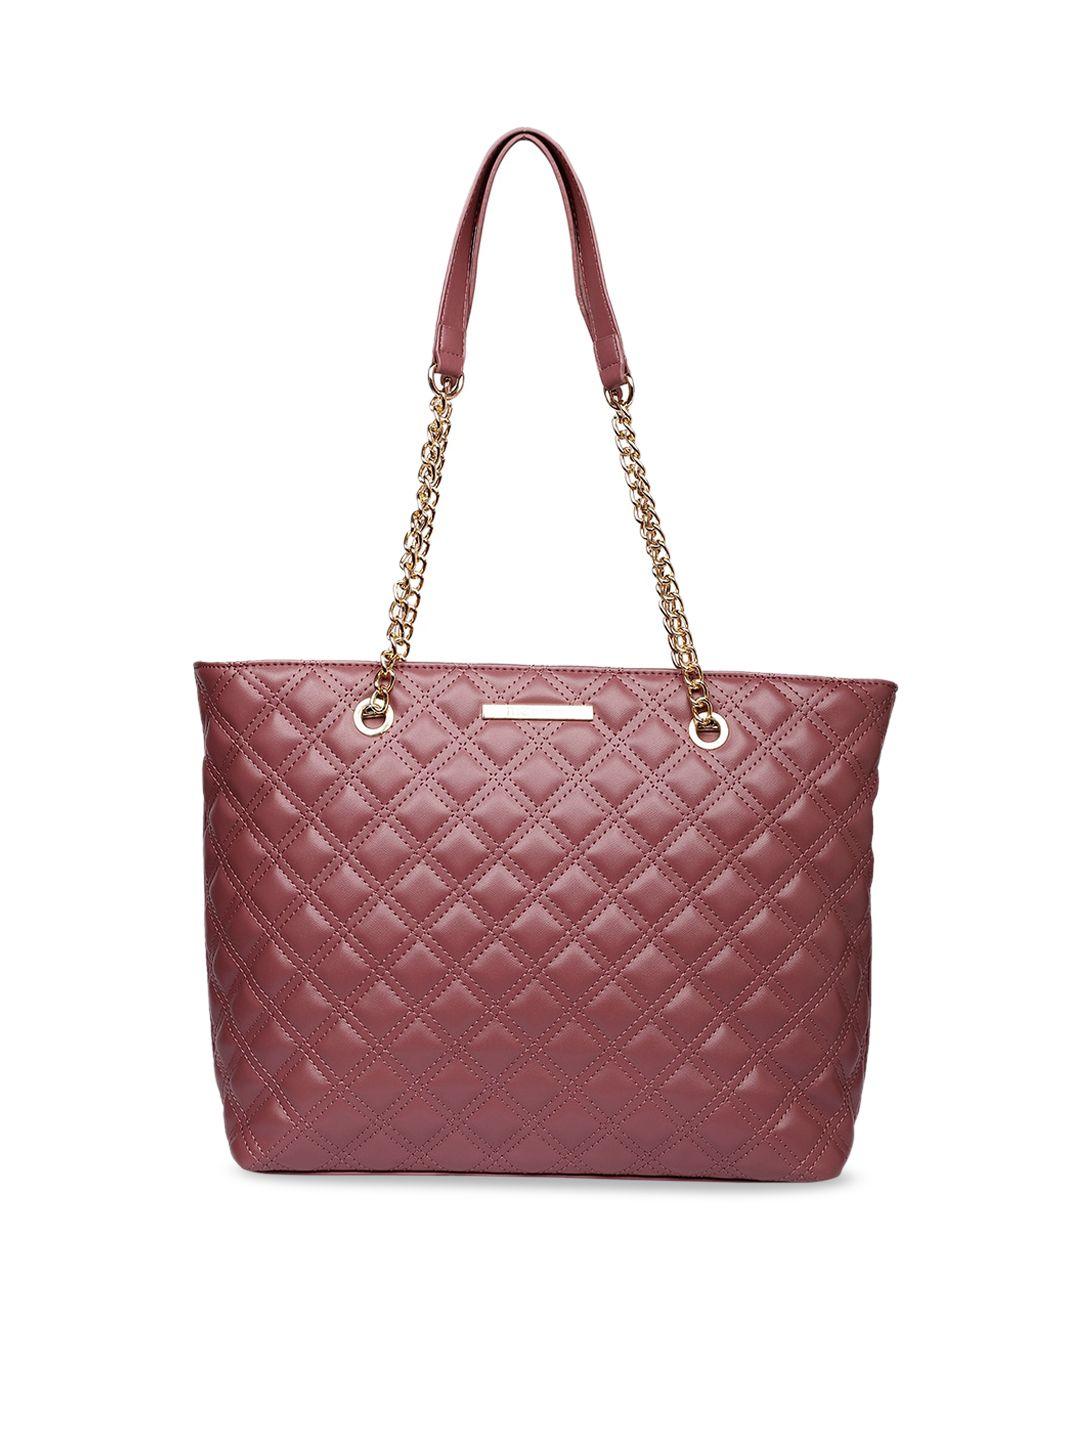 marie claire maroon textured structured shoulder bag with quilted